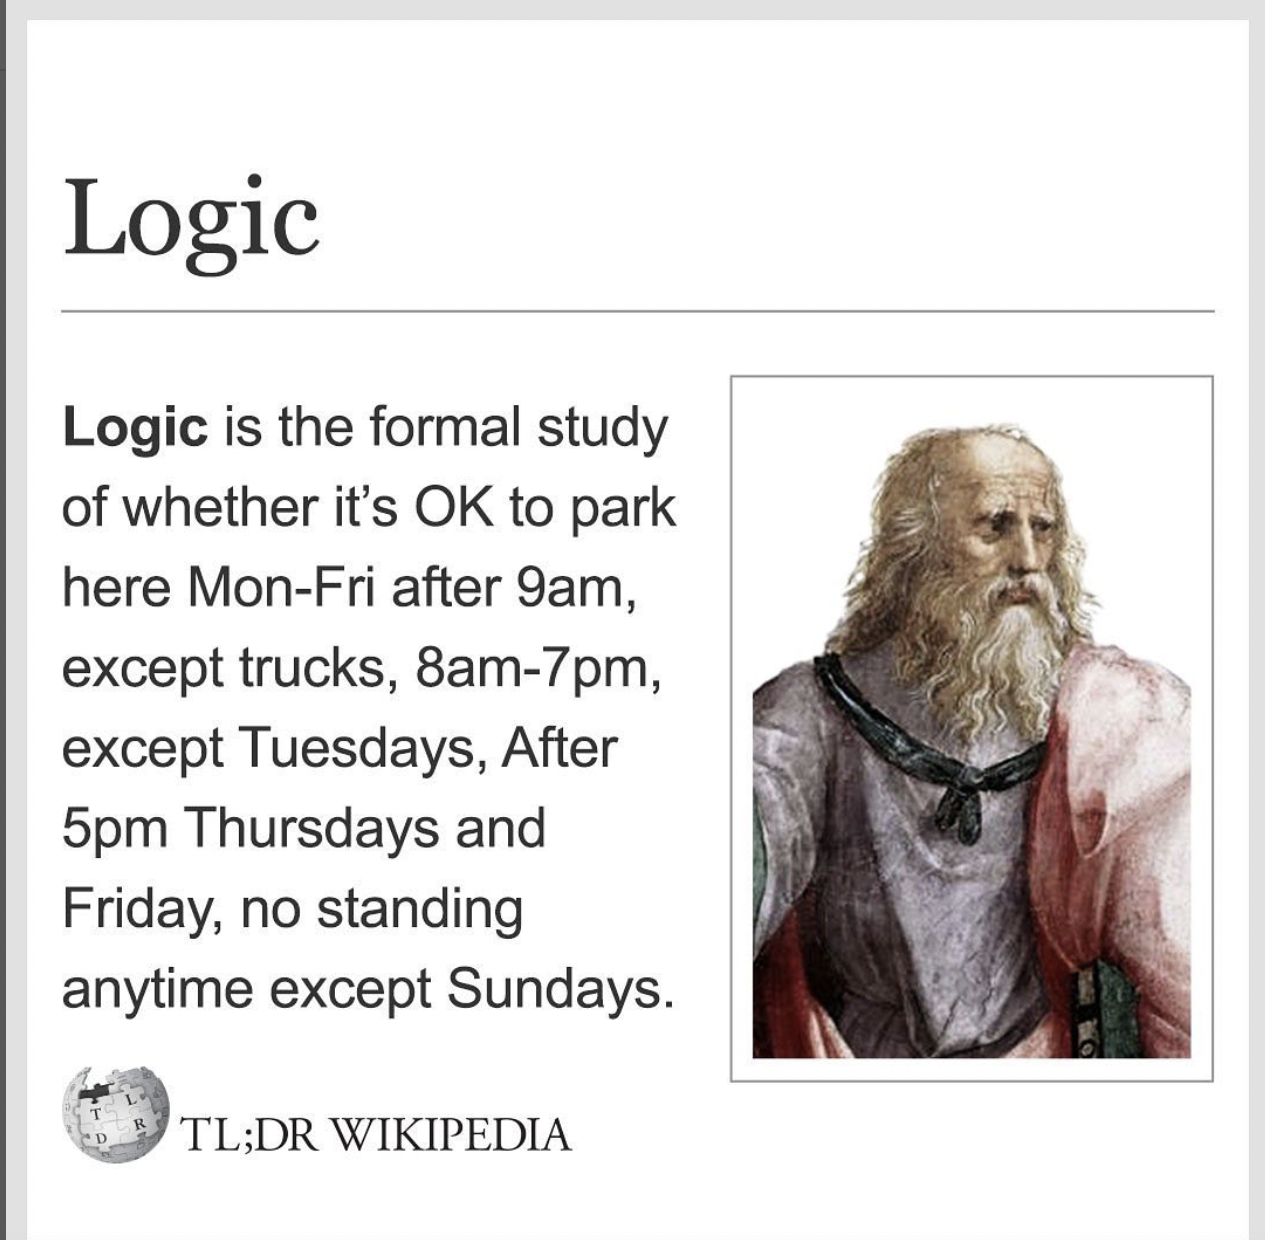 Wikipedia Memes - Logic Logic is the formal study of whether it's Ok to park here MonFri after 9am, except trucks, 8am7pm, except Tuesdays, After 5pm Thursdays and Friday, no standing anytime except Sundays. Tl;Dr Wikipedia